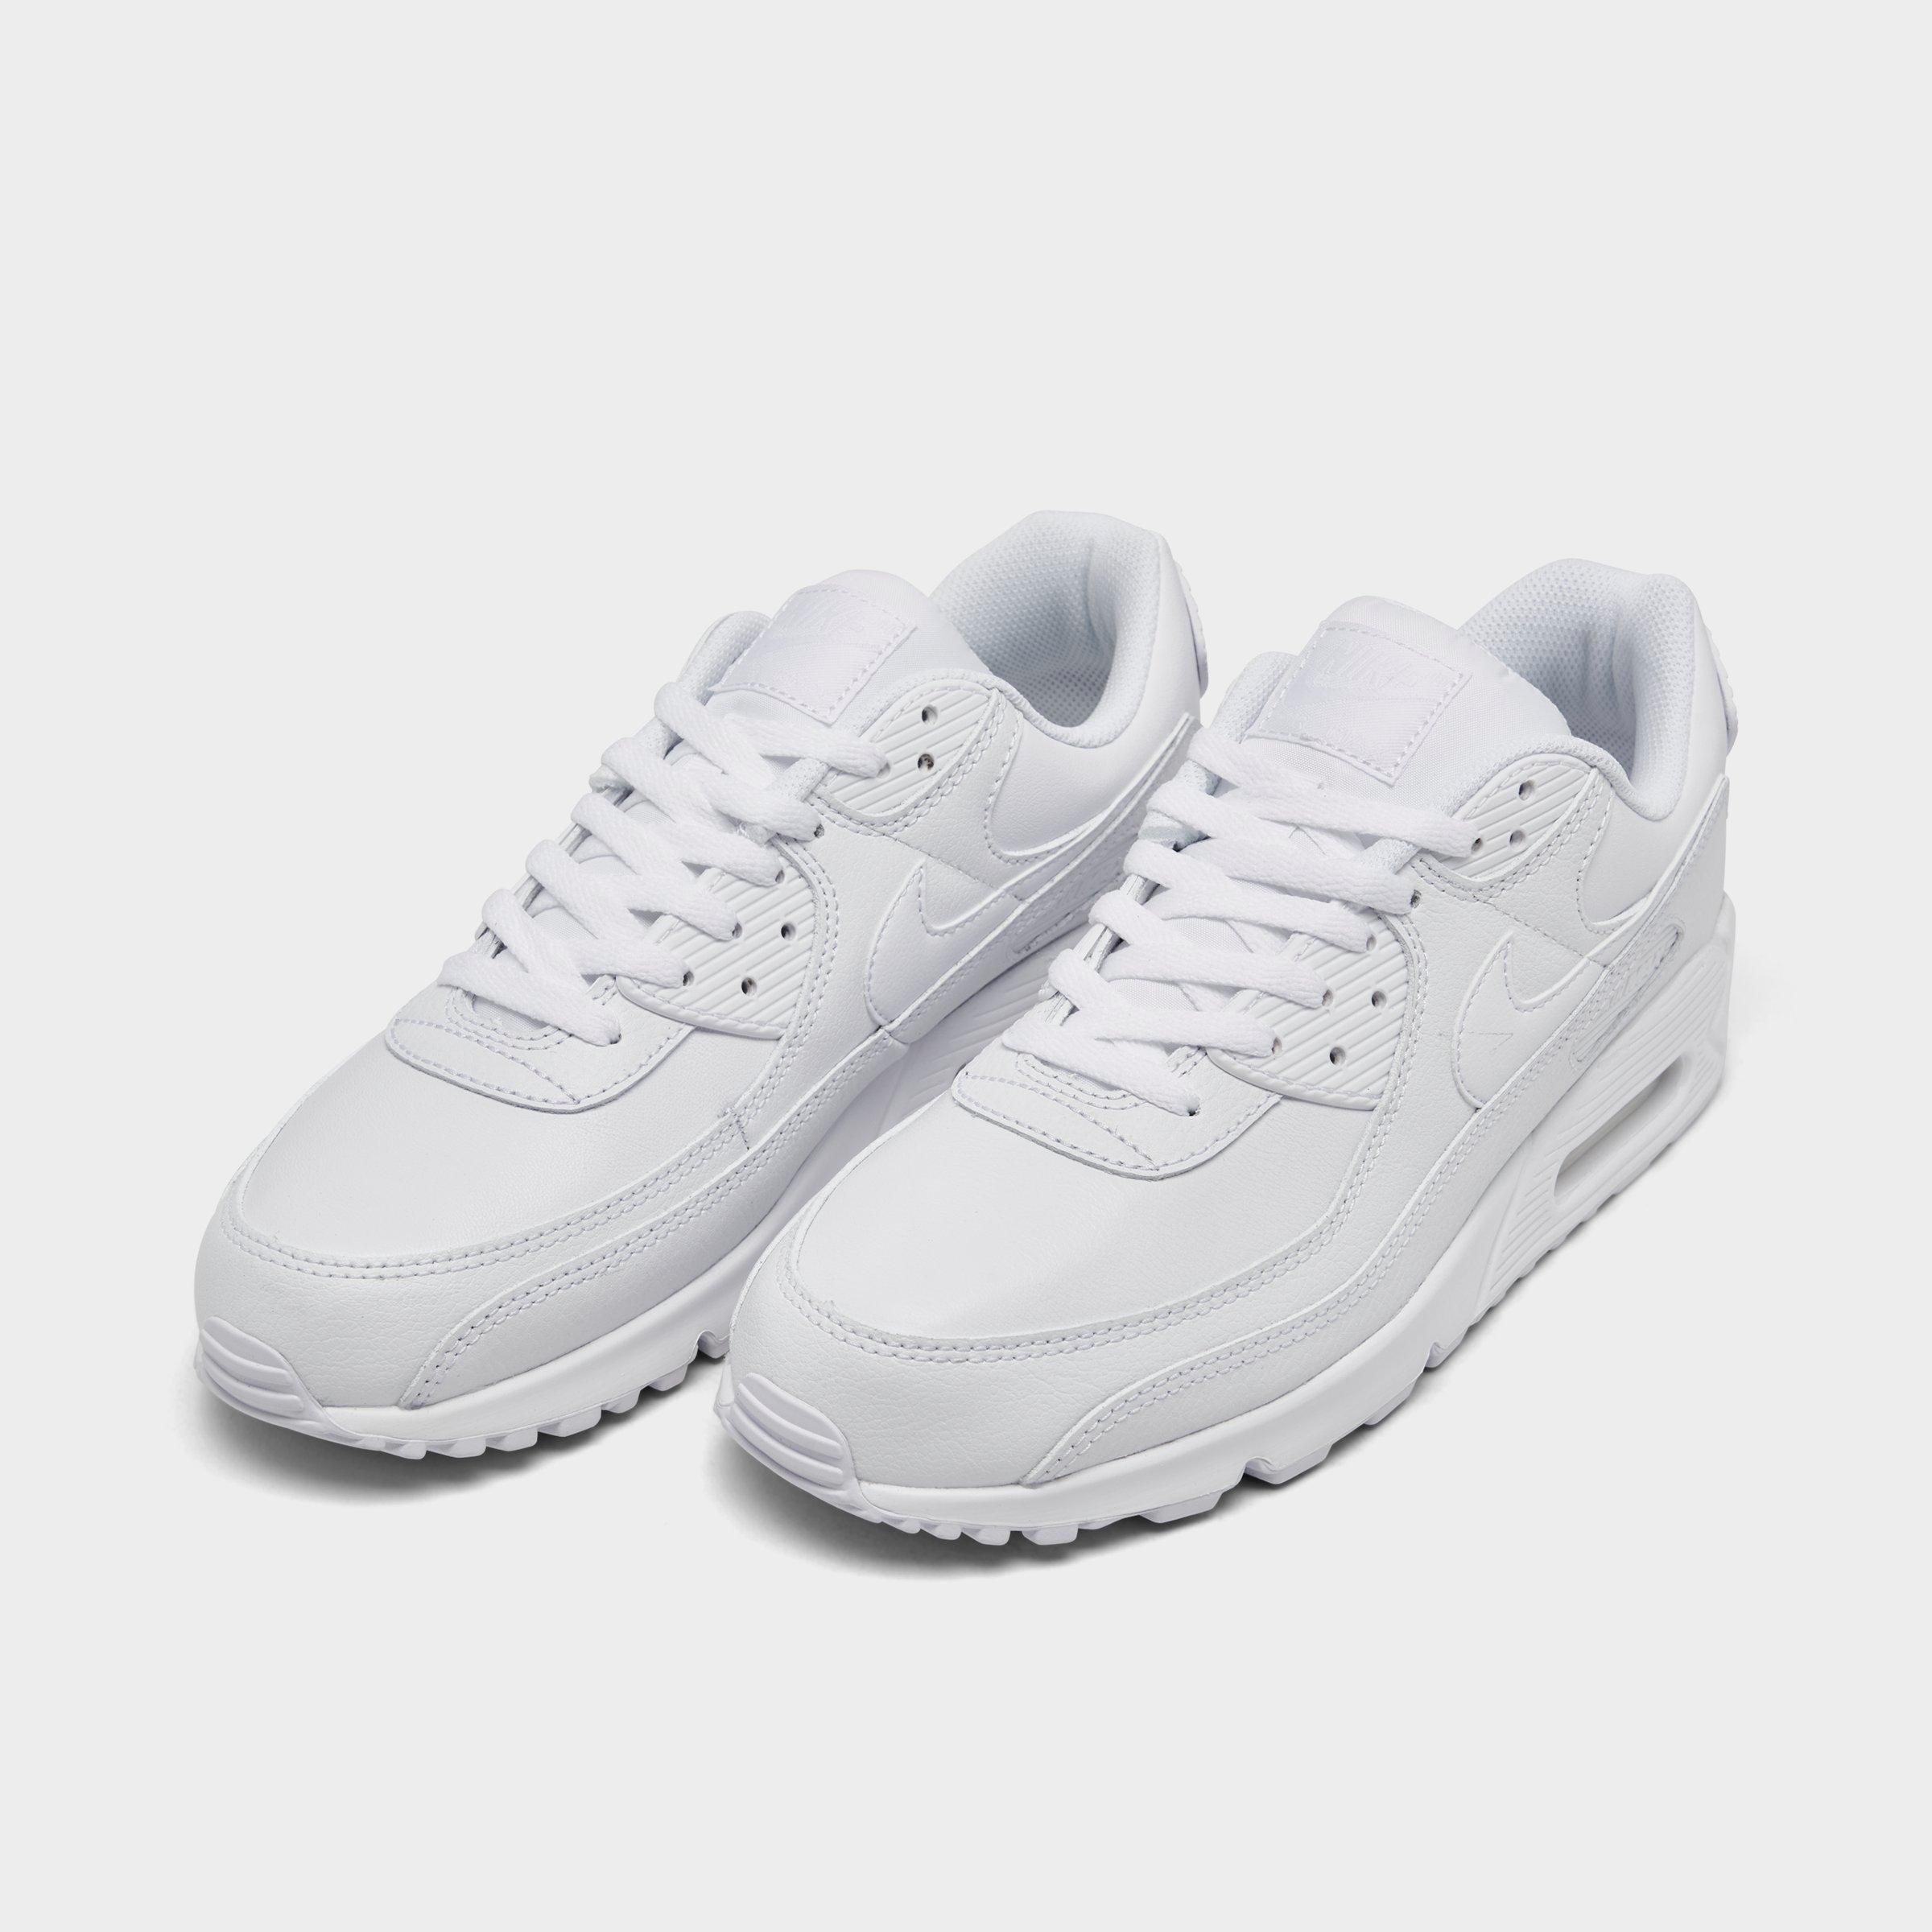 Men's Nike Air Max 90 Leather Casual 